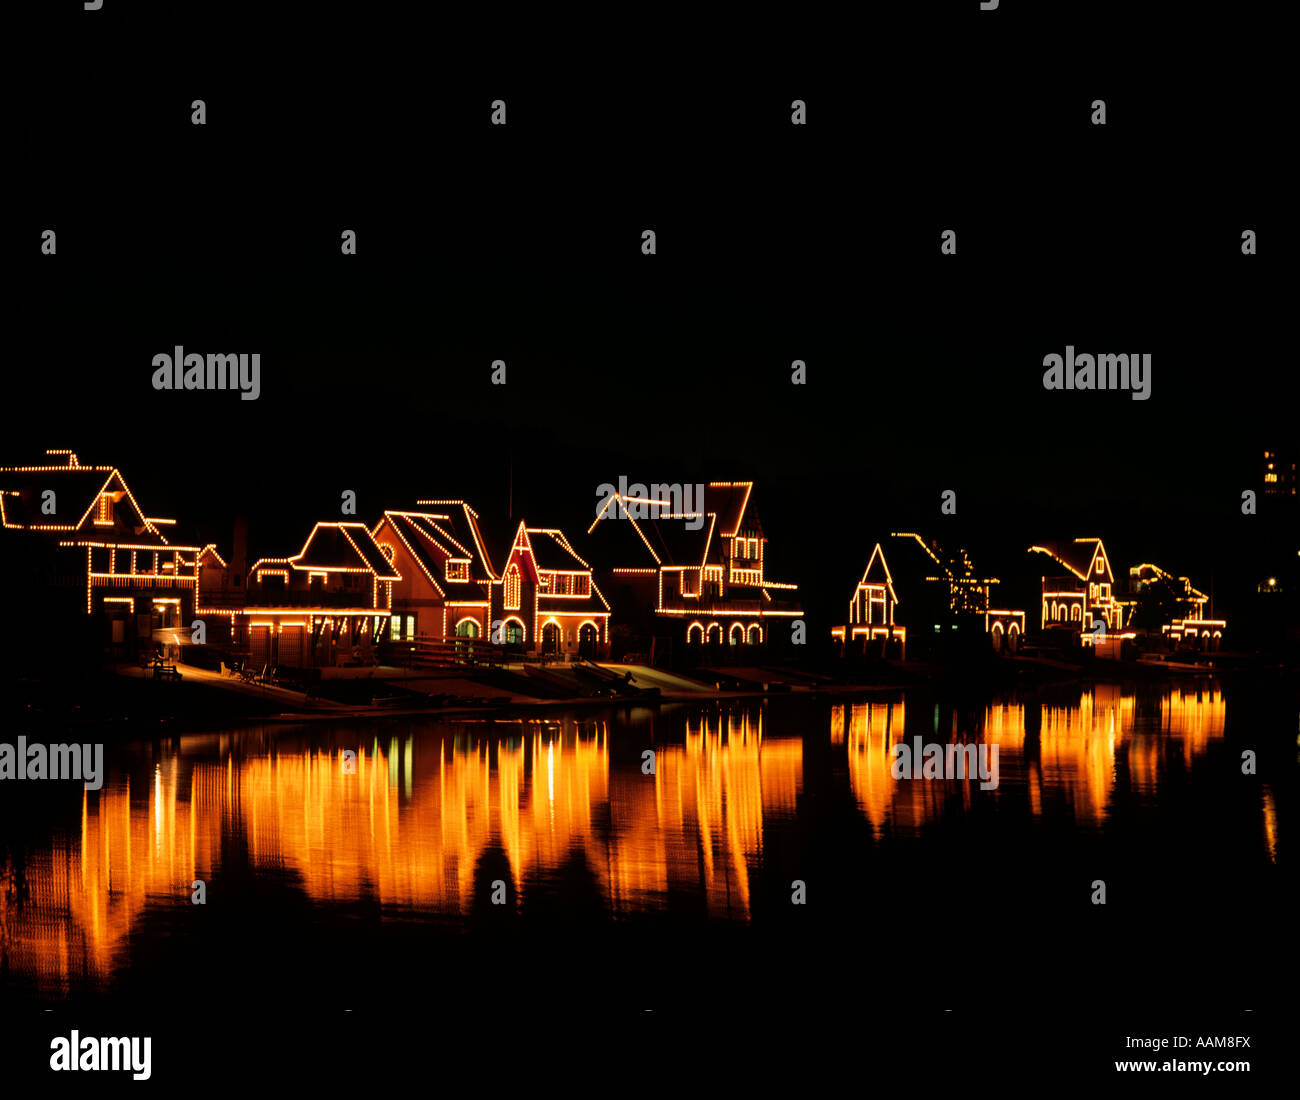 PHILADELPHIA PENNSYLVANIA BOATHOUSE ROW LIT UP AT NIGHT Banque D'Images